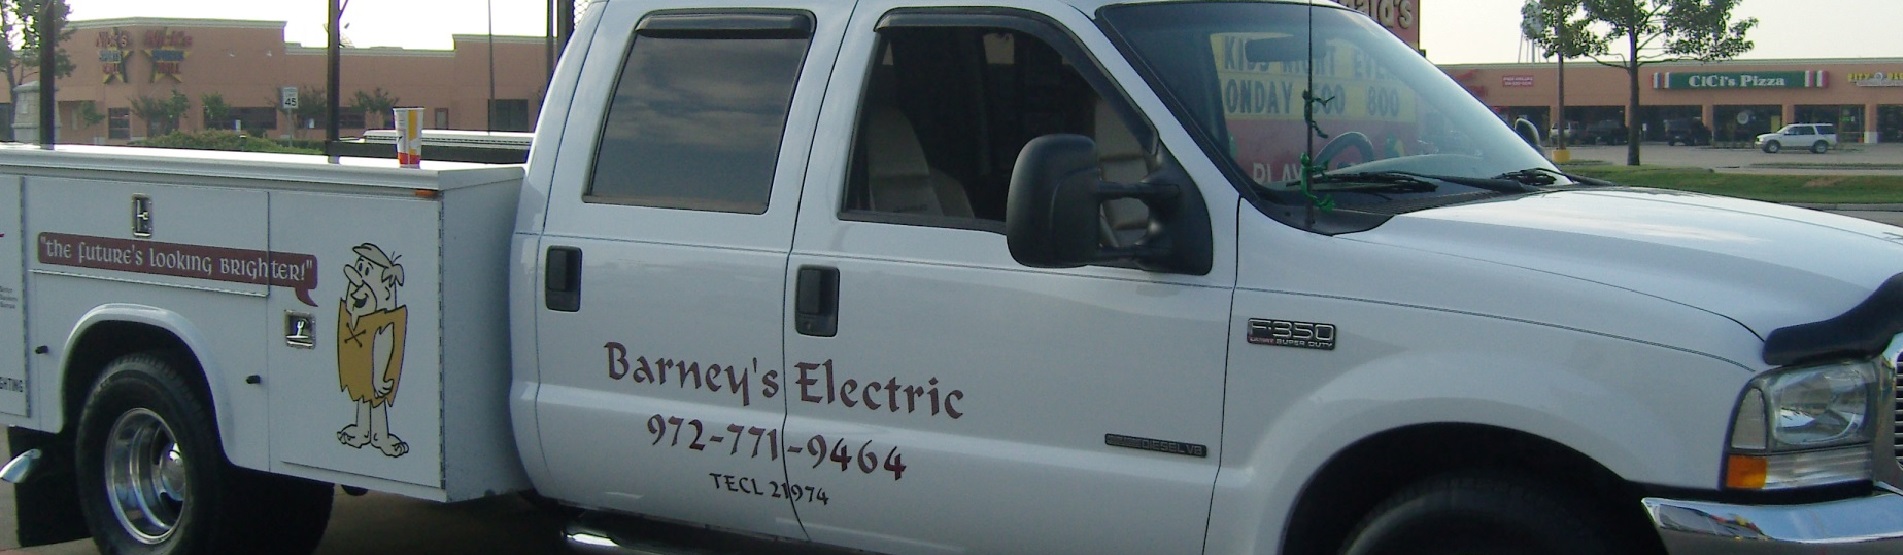 Electrician Rowlett TX Barney's Electric Full Service Electrician Residential Commercial Retail and New Construction Wiring Repair Installation Service 24 Hour Emergency Services Master Electrician Rockwall Texas